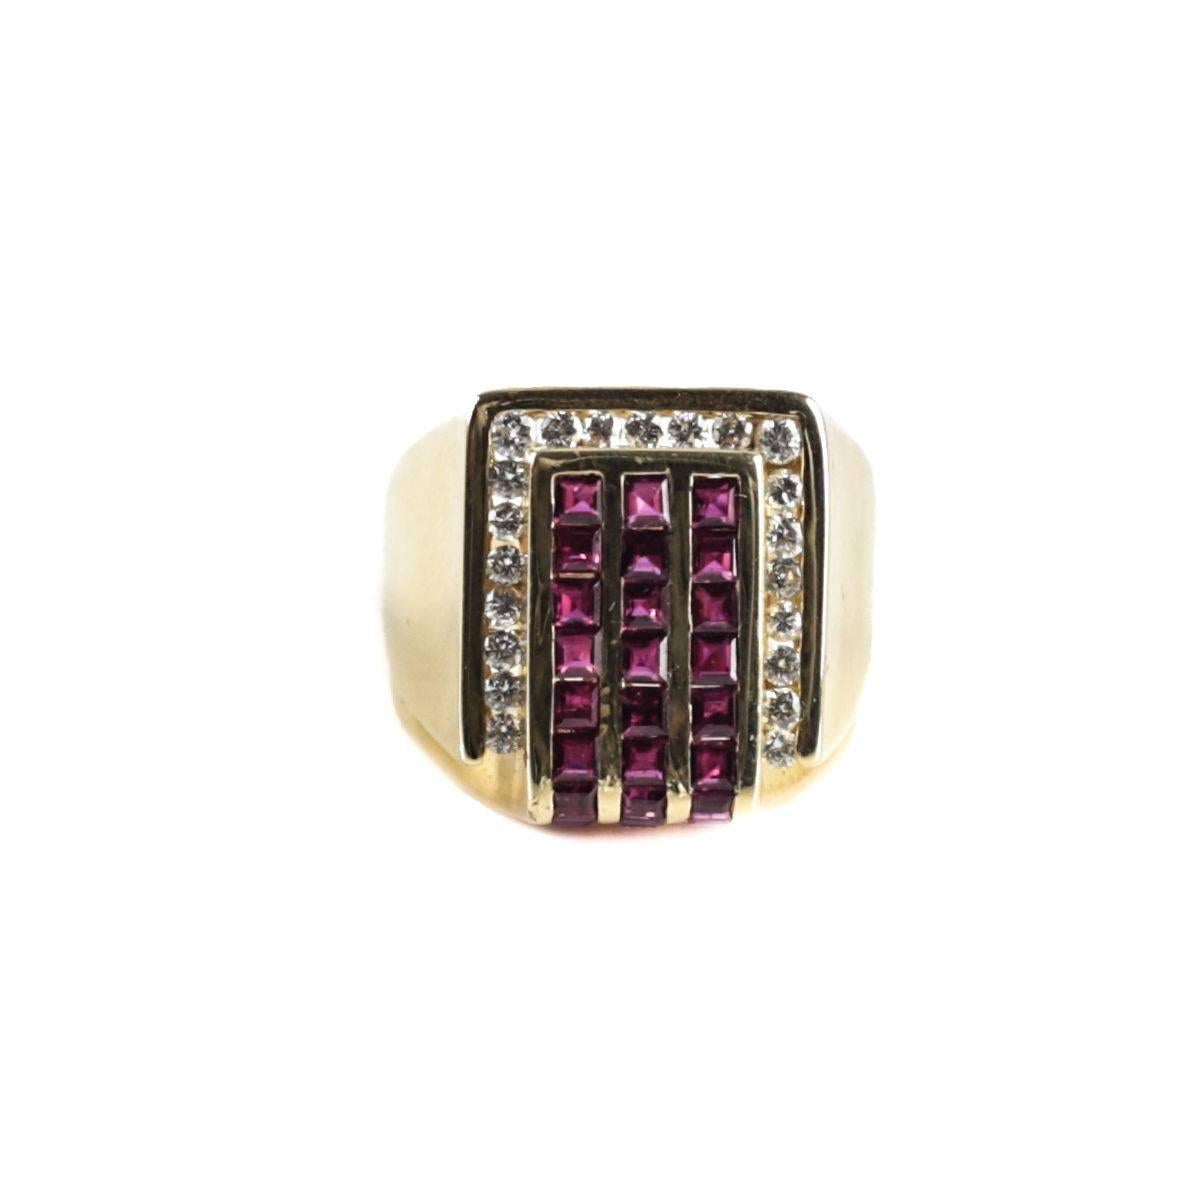 A high quality ruby and diamond ring mounted in 18 karat yellow gold by Charles Krypell. 30 square cut rubies with 21 round cut diamonds. Marked 750 and Krypell to the inner band, 
circa 1985.

Weight Approx., 19.25 grams

Measures Approx.,